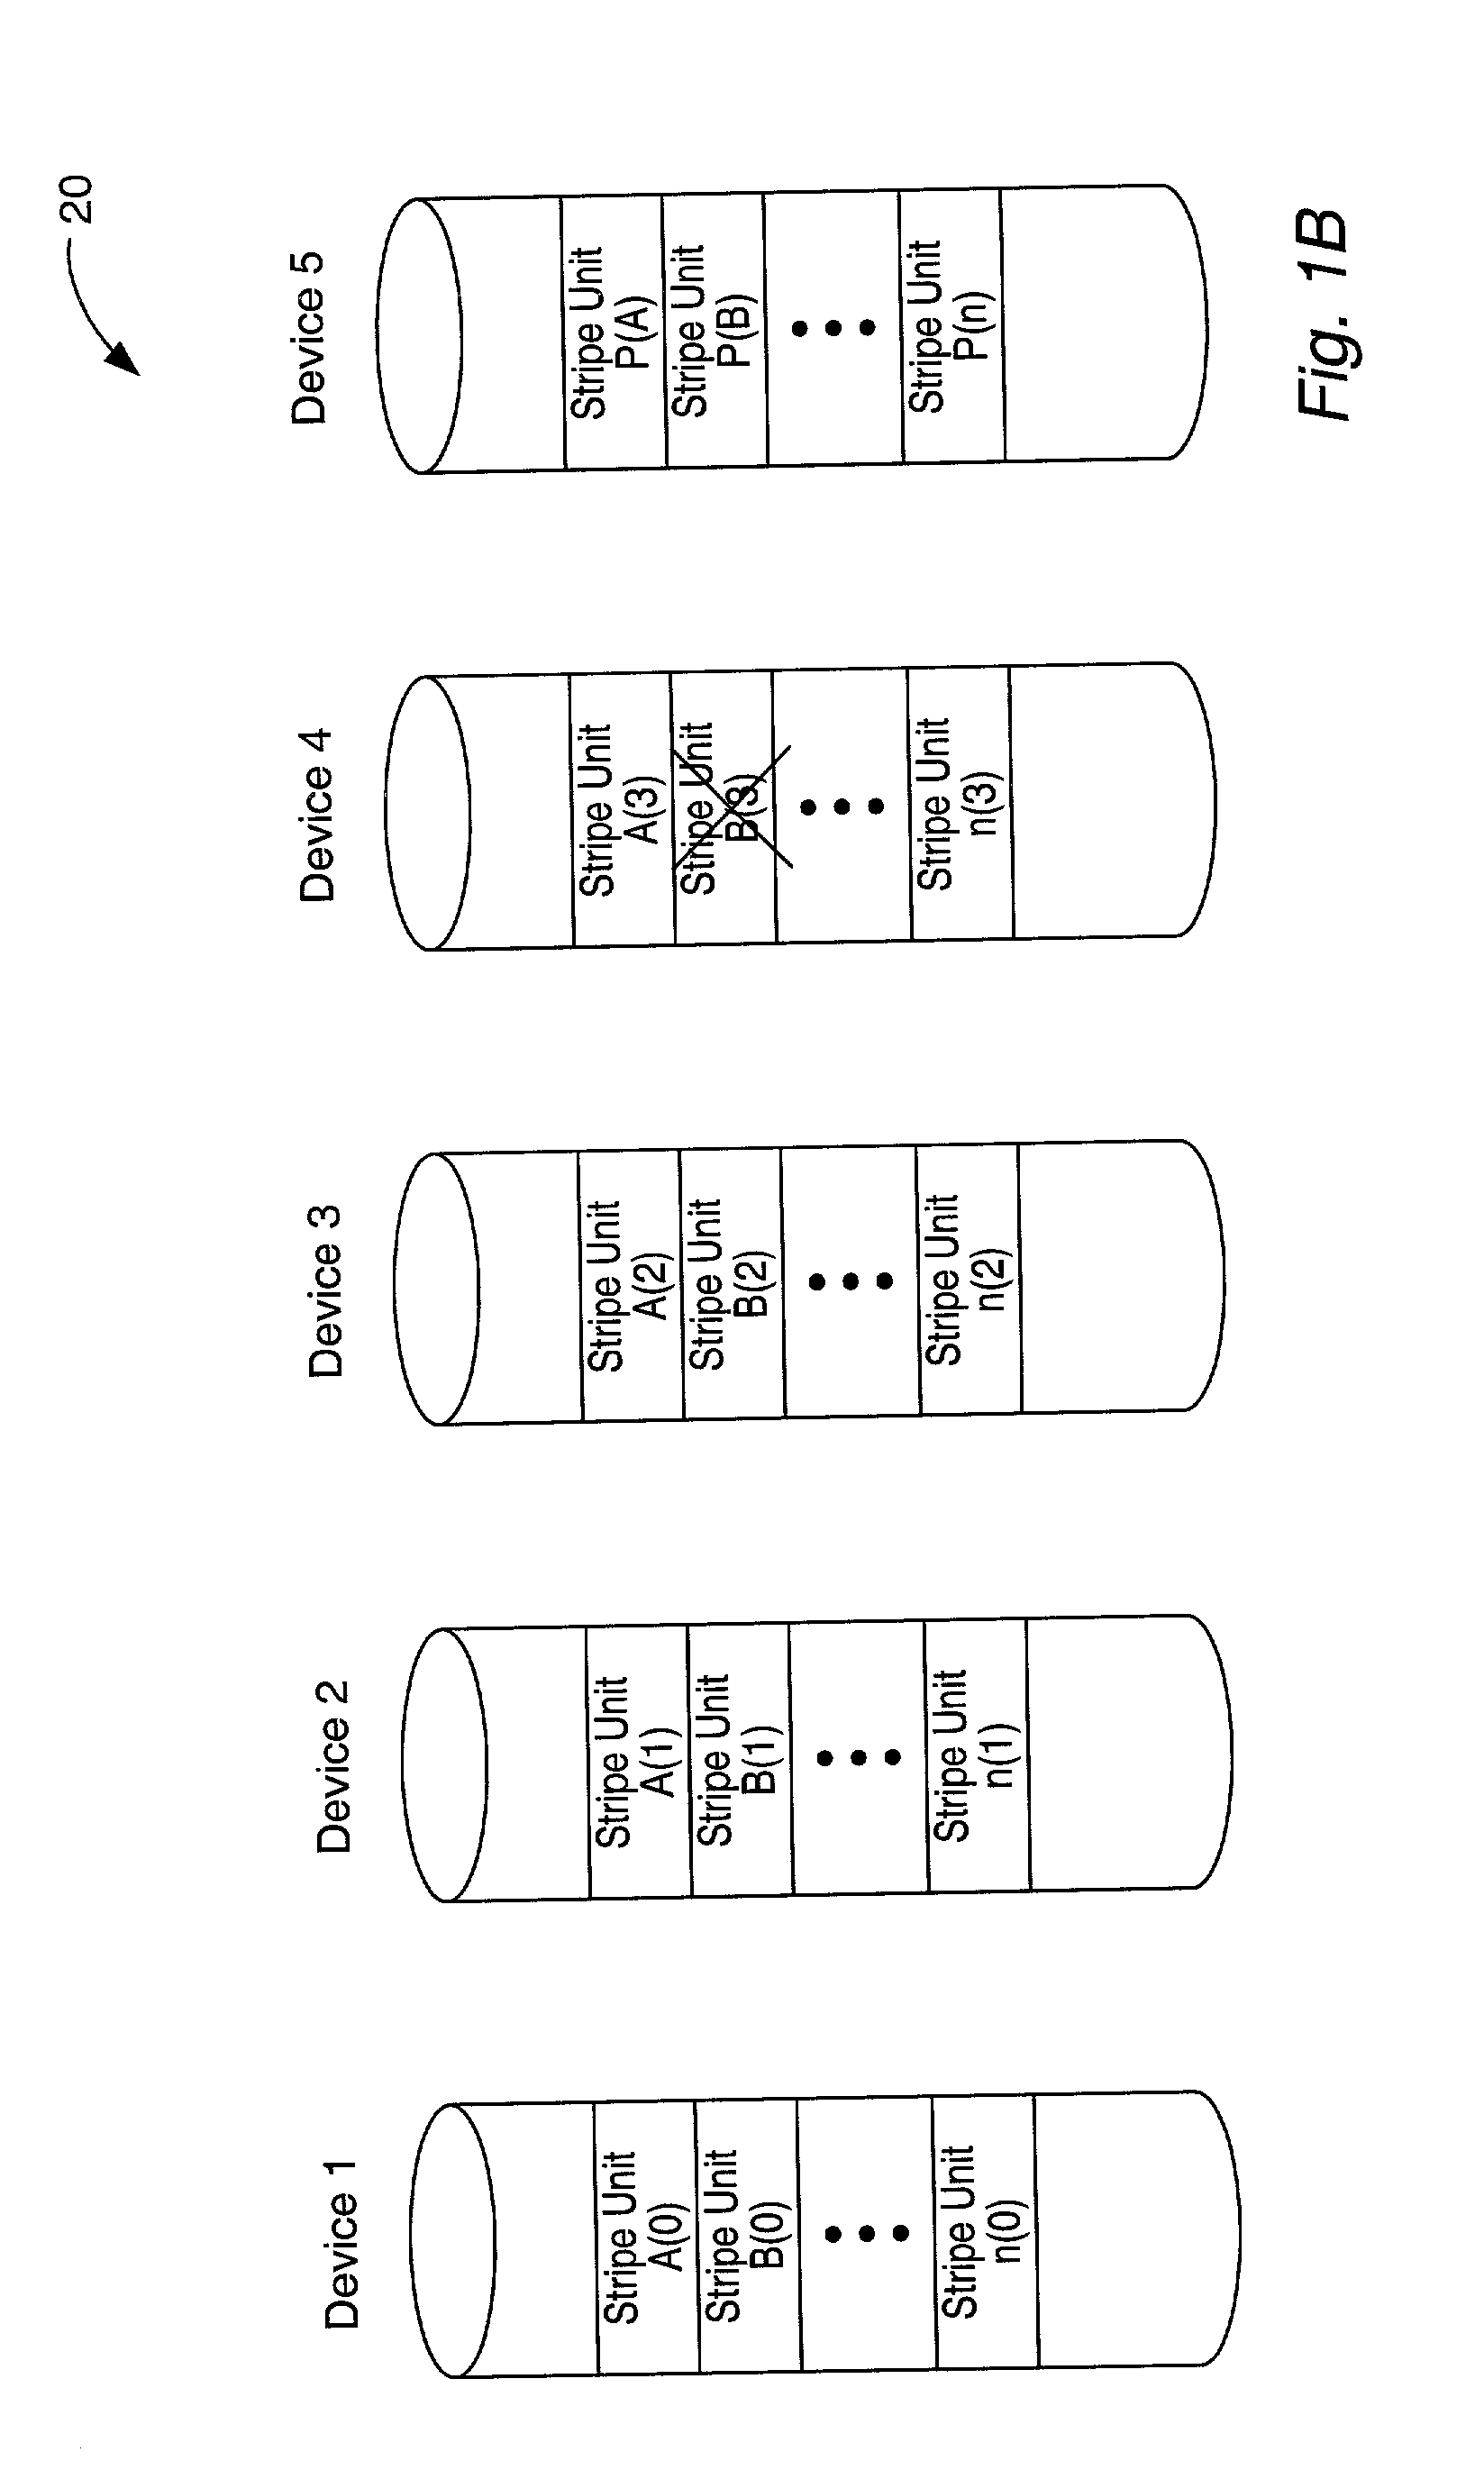 Storage array employing scrubbing operations using multiple levels of checksums